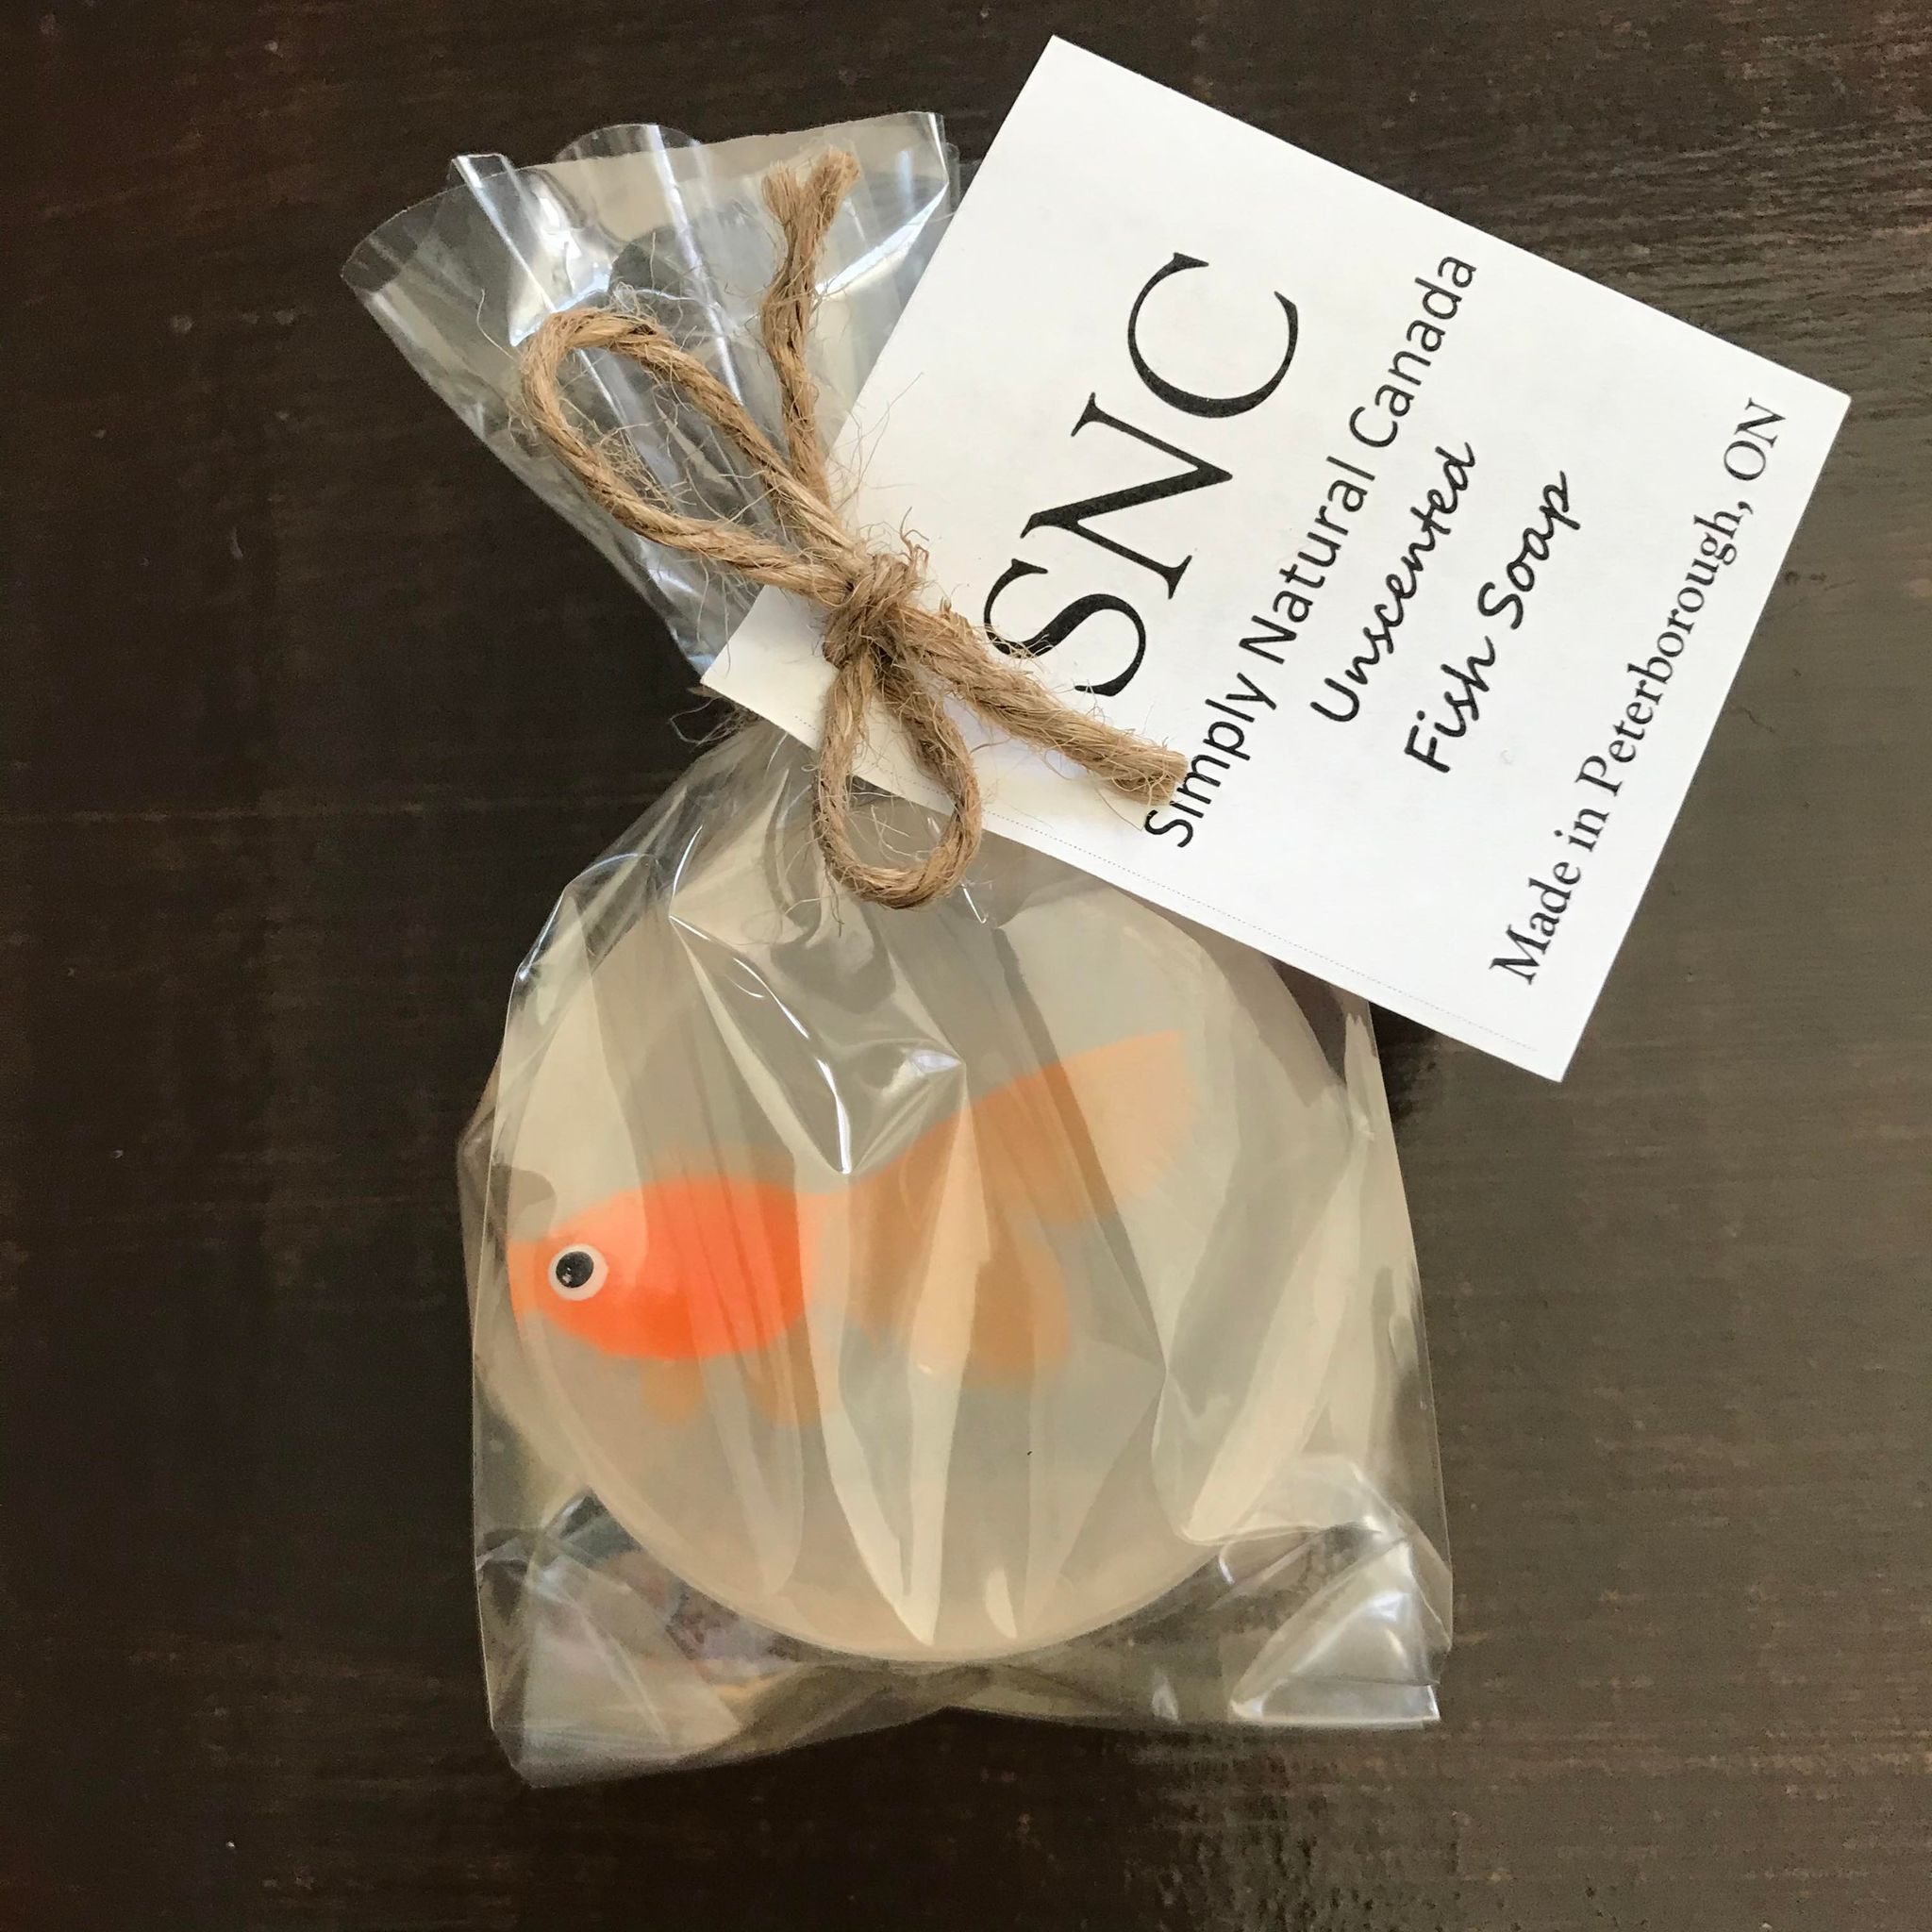 Orange vinyl fish inside a clear round vegetable glycerin soap packaged inside a compostable bag and made in Canada by Simply Natural Canada